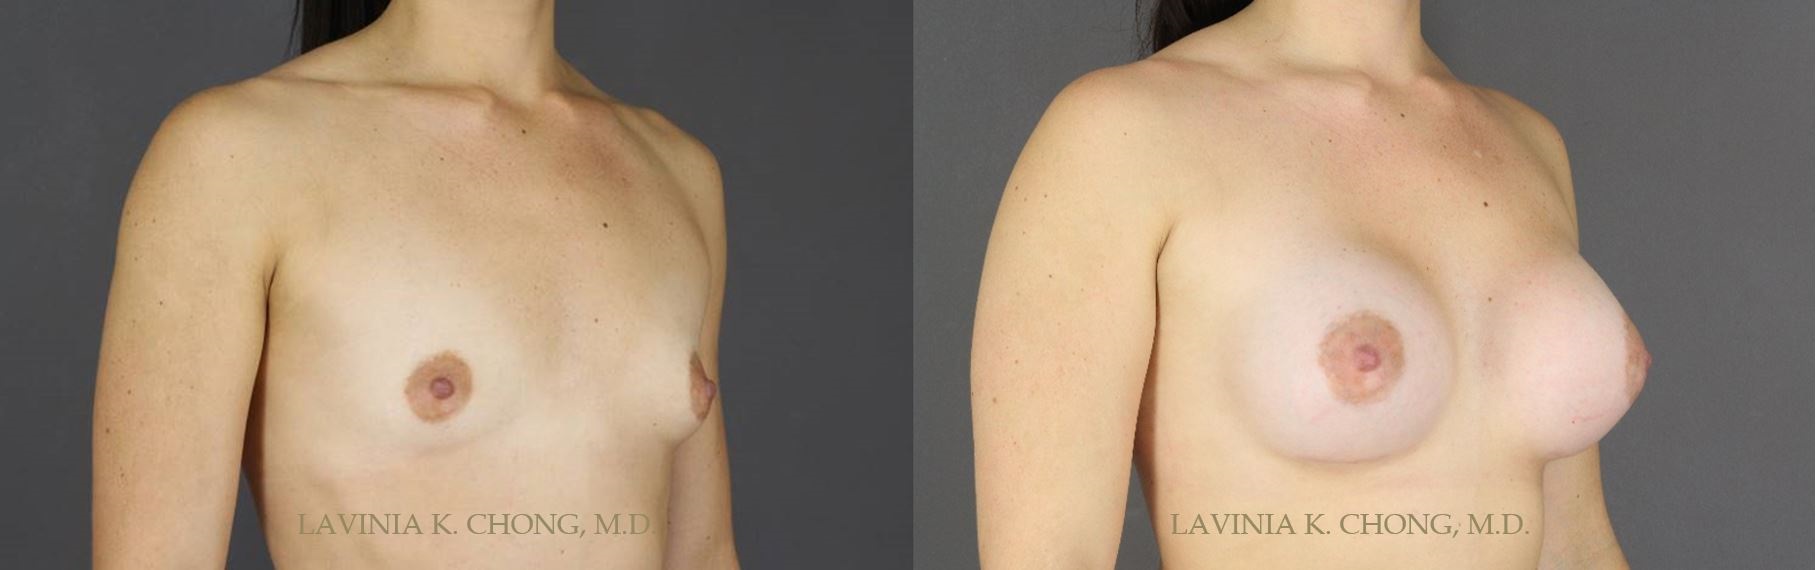 Before and After photo of 23 yr old with Hypomastia and Breast Asymmetry treated with Breast Augmentation and Mentor SHPB 400cc and 480cc High Profile Boost Silicone Implants with Application of DuraSorb by female plastic surgeon in Newport Beach, California.